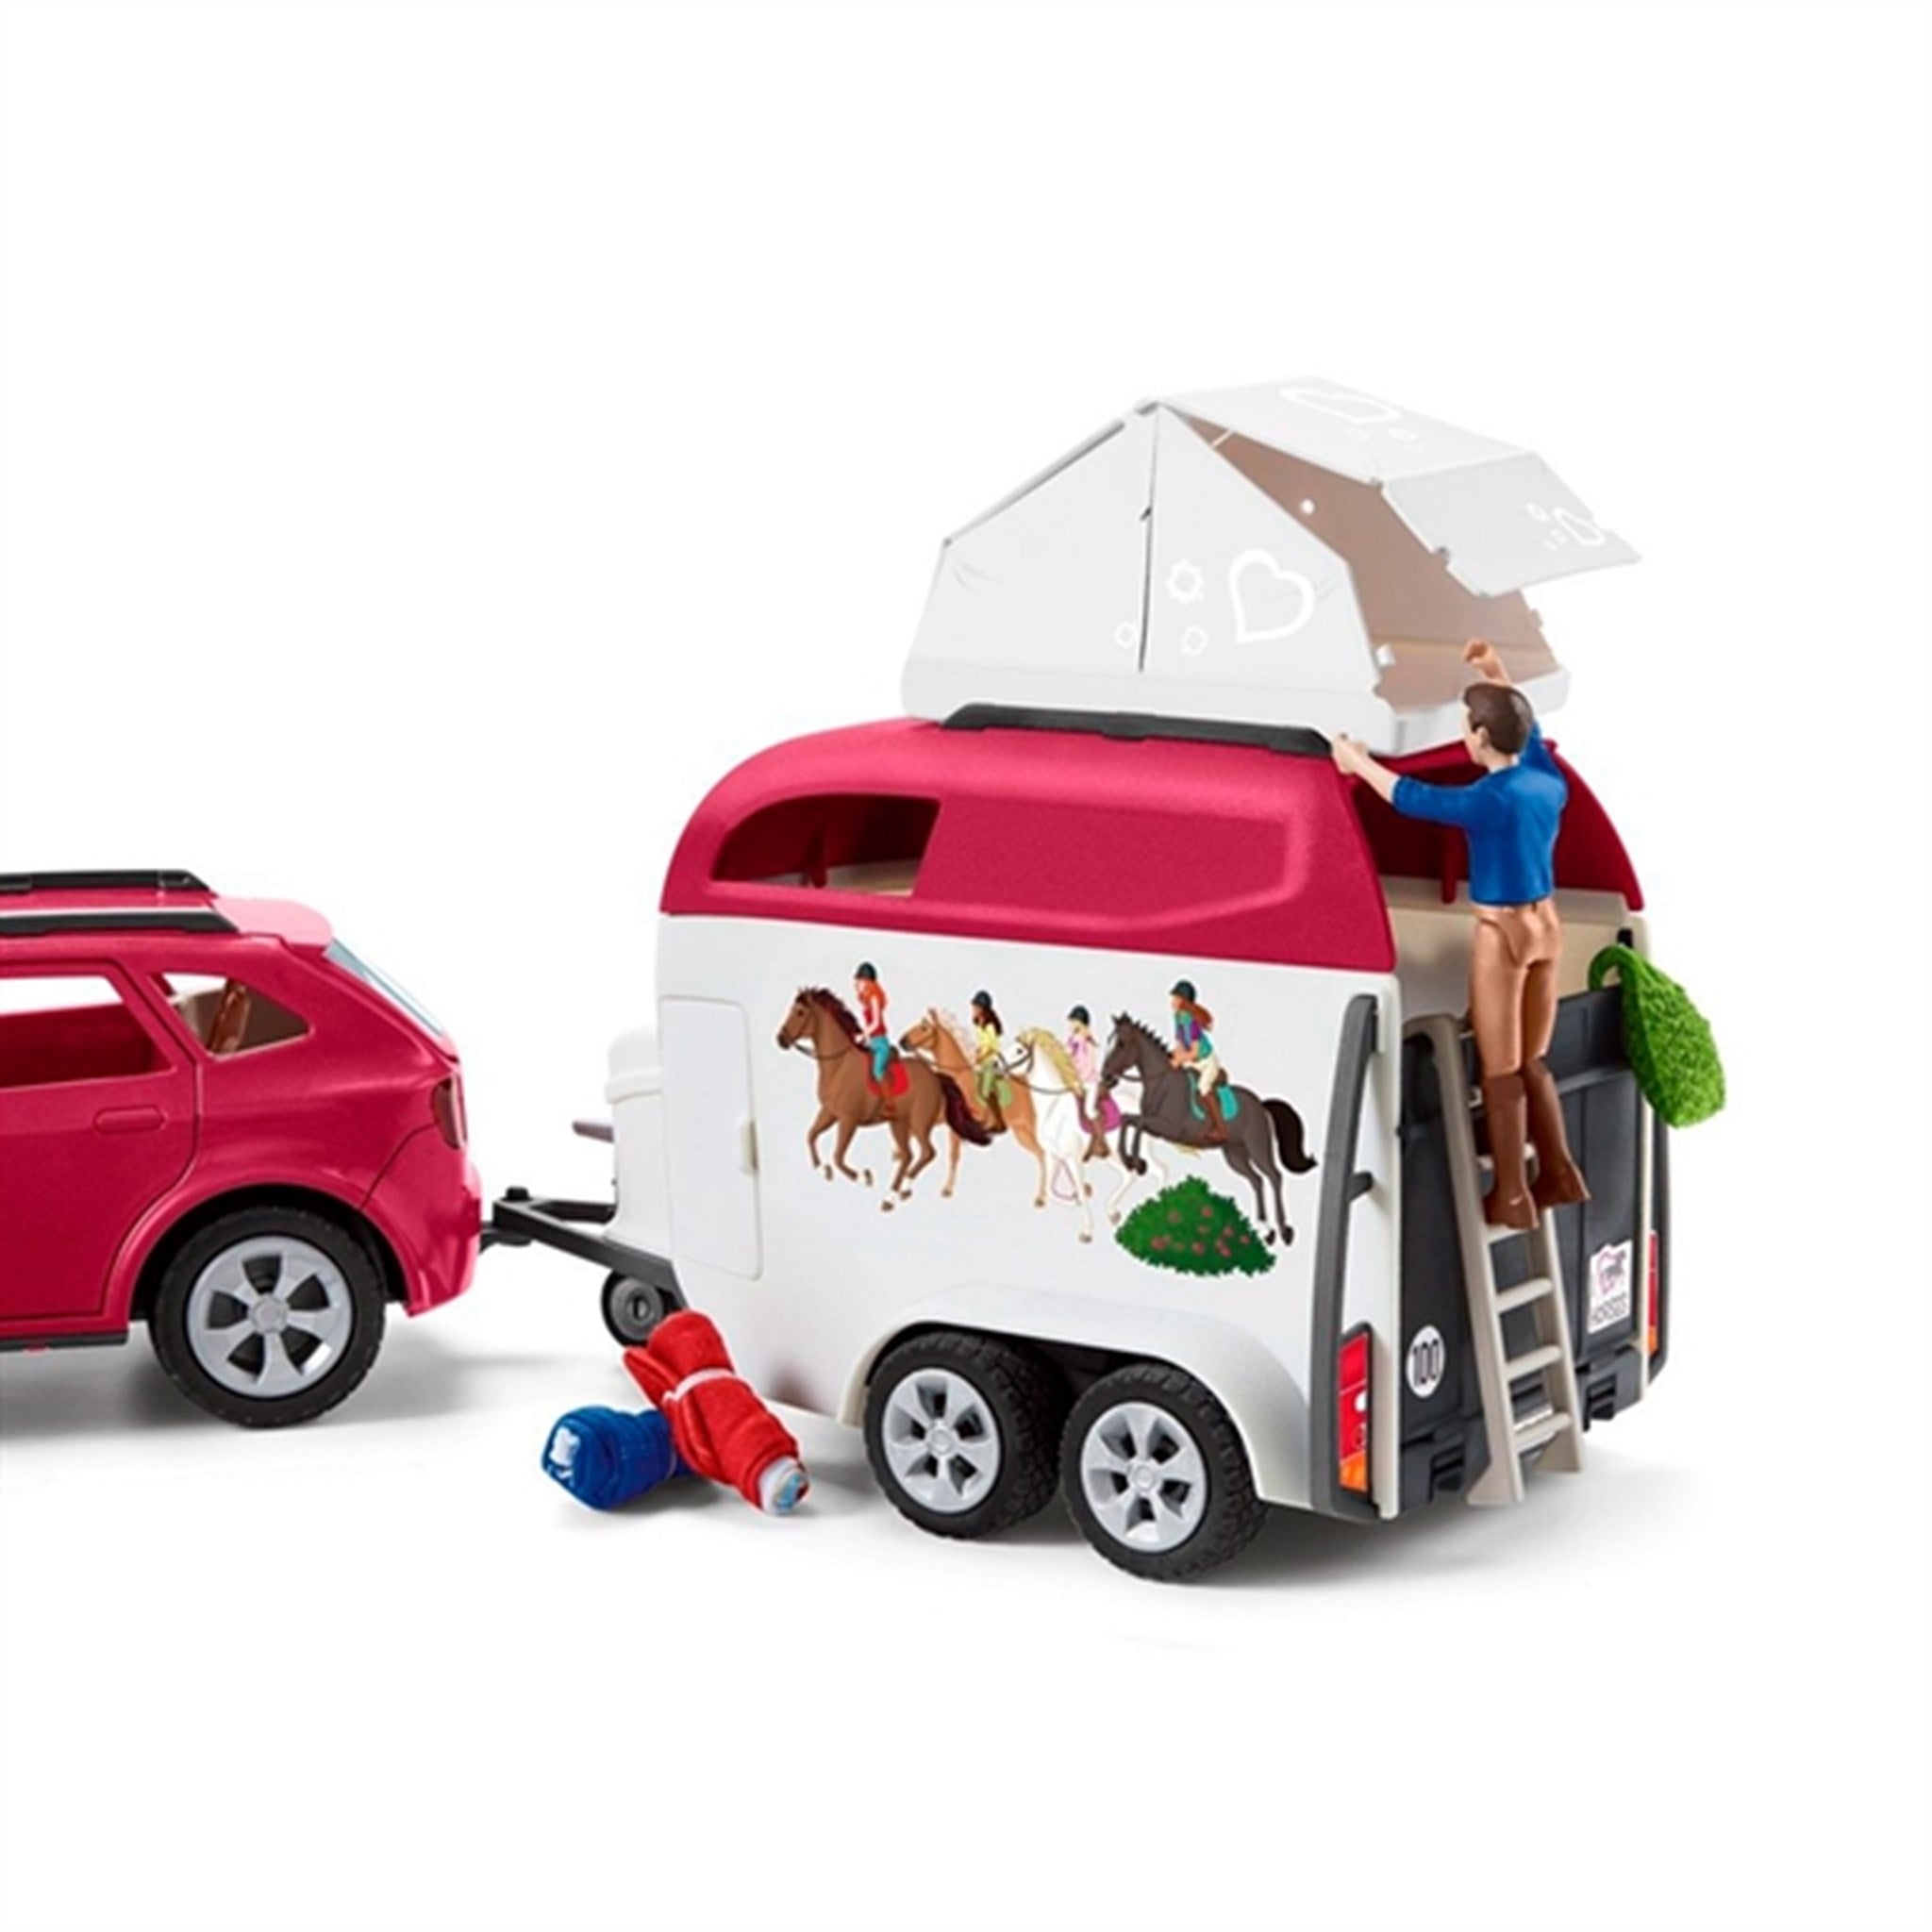 Schleich Horse Club Adventures with Car and Trailer 2